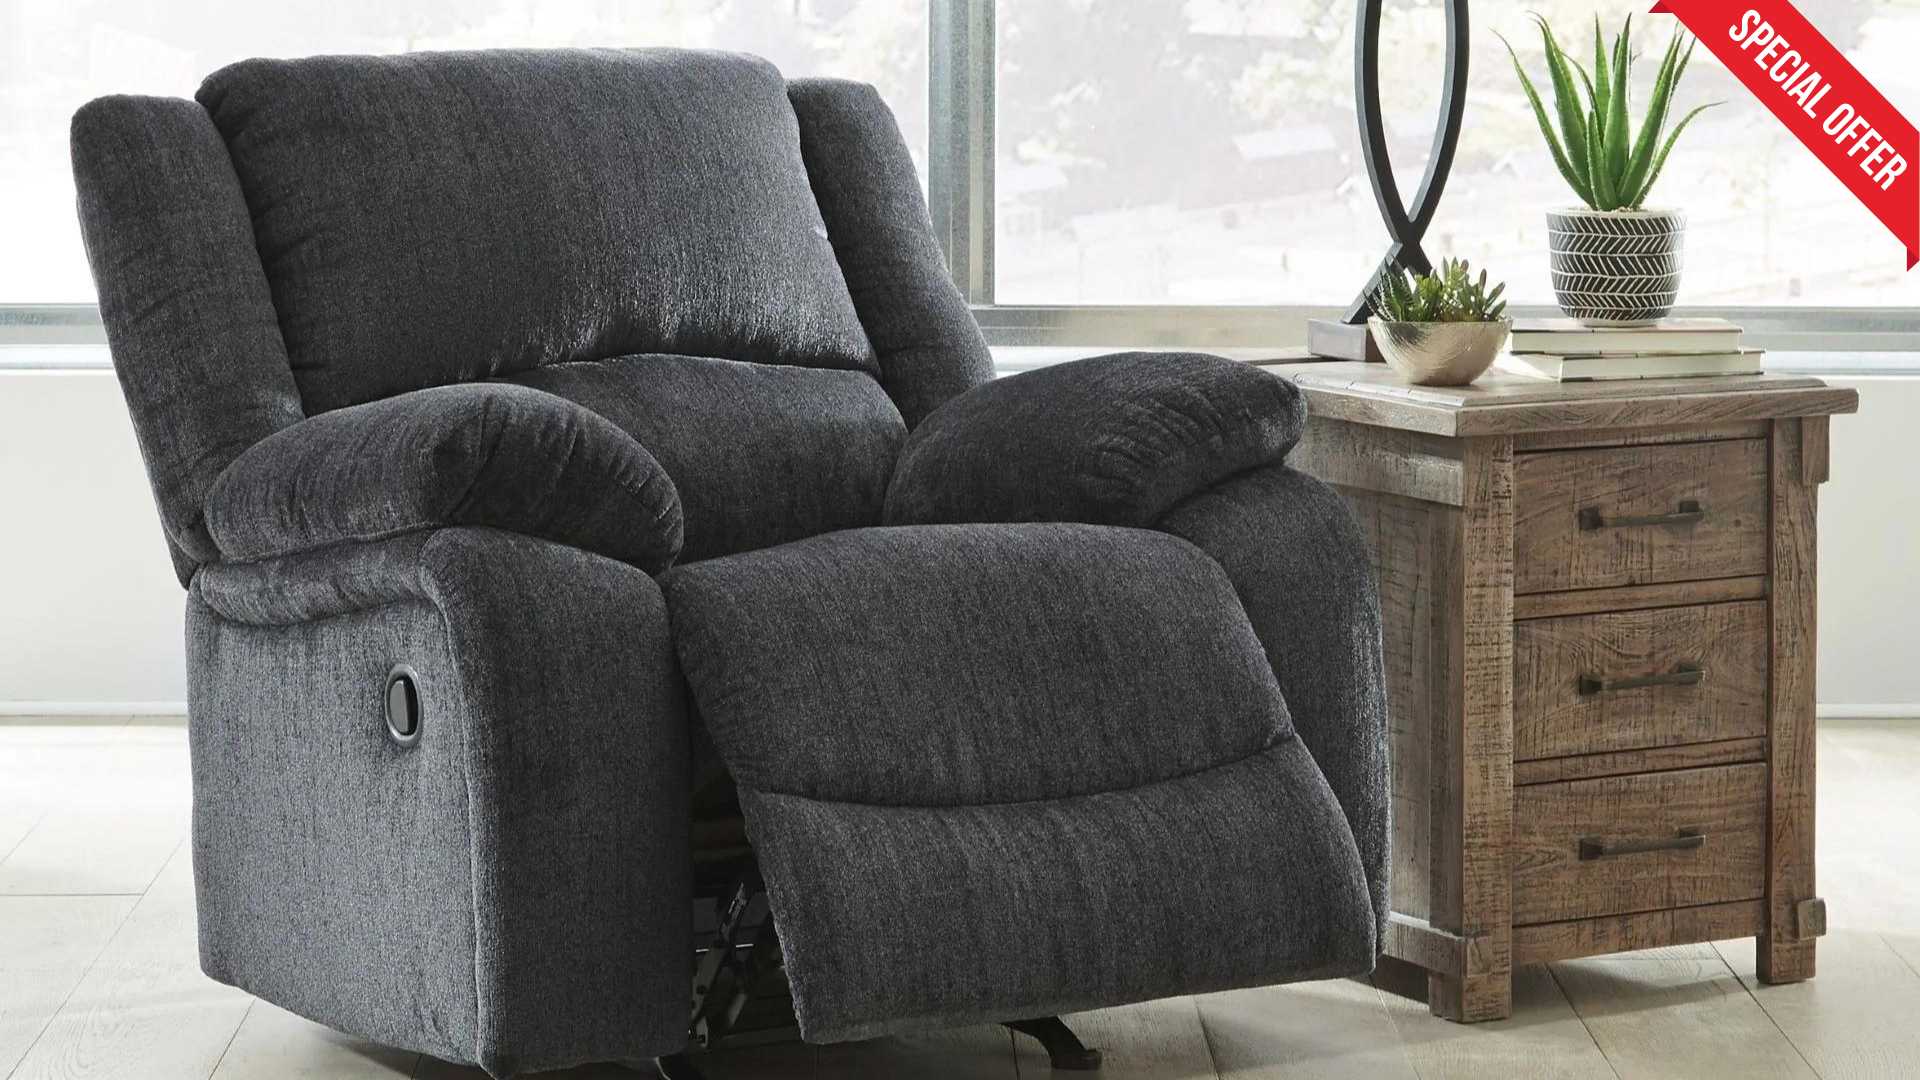 Draycoll Power Recliner